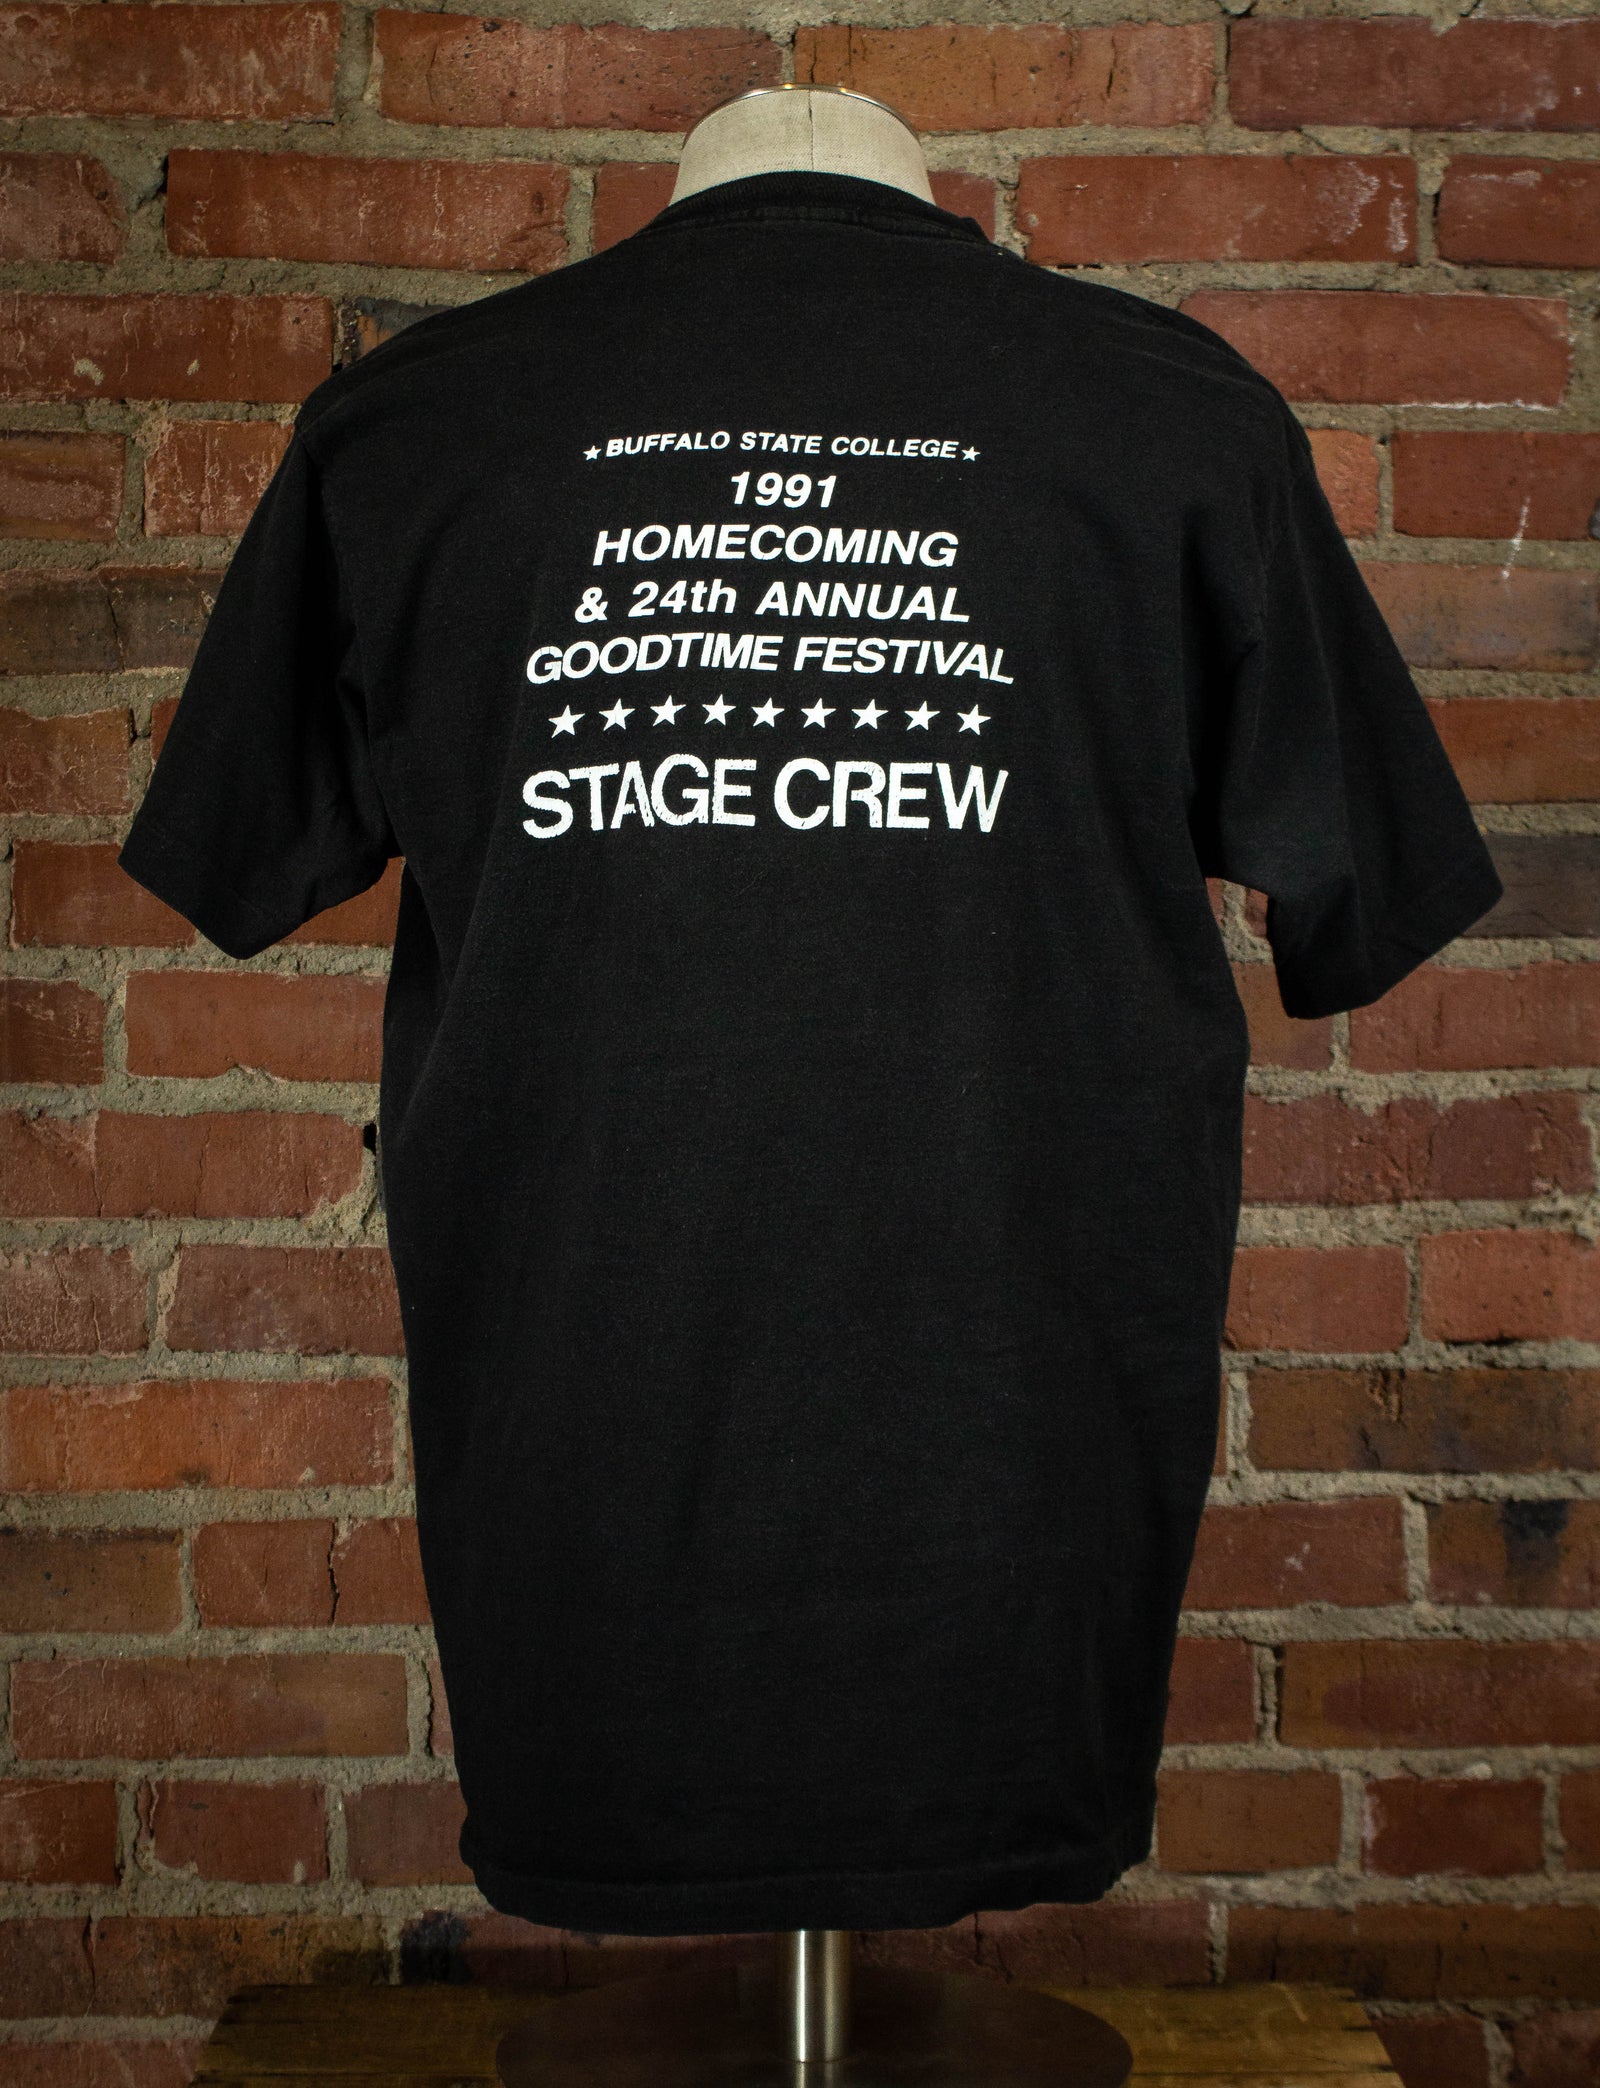 Vintage 1991 Buffalo State College Homecoming Goodtime Festival Stage Crew Shirt Unisex XL